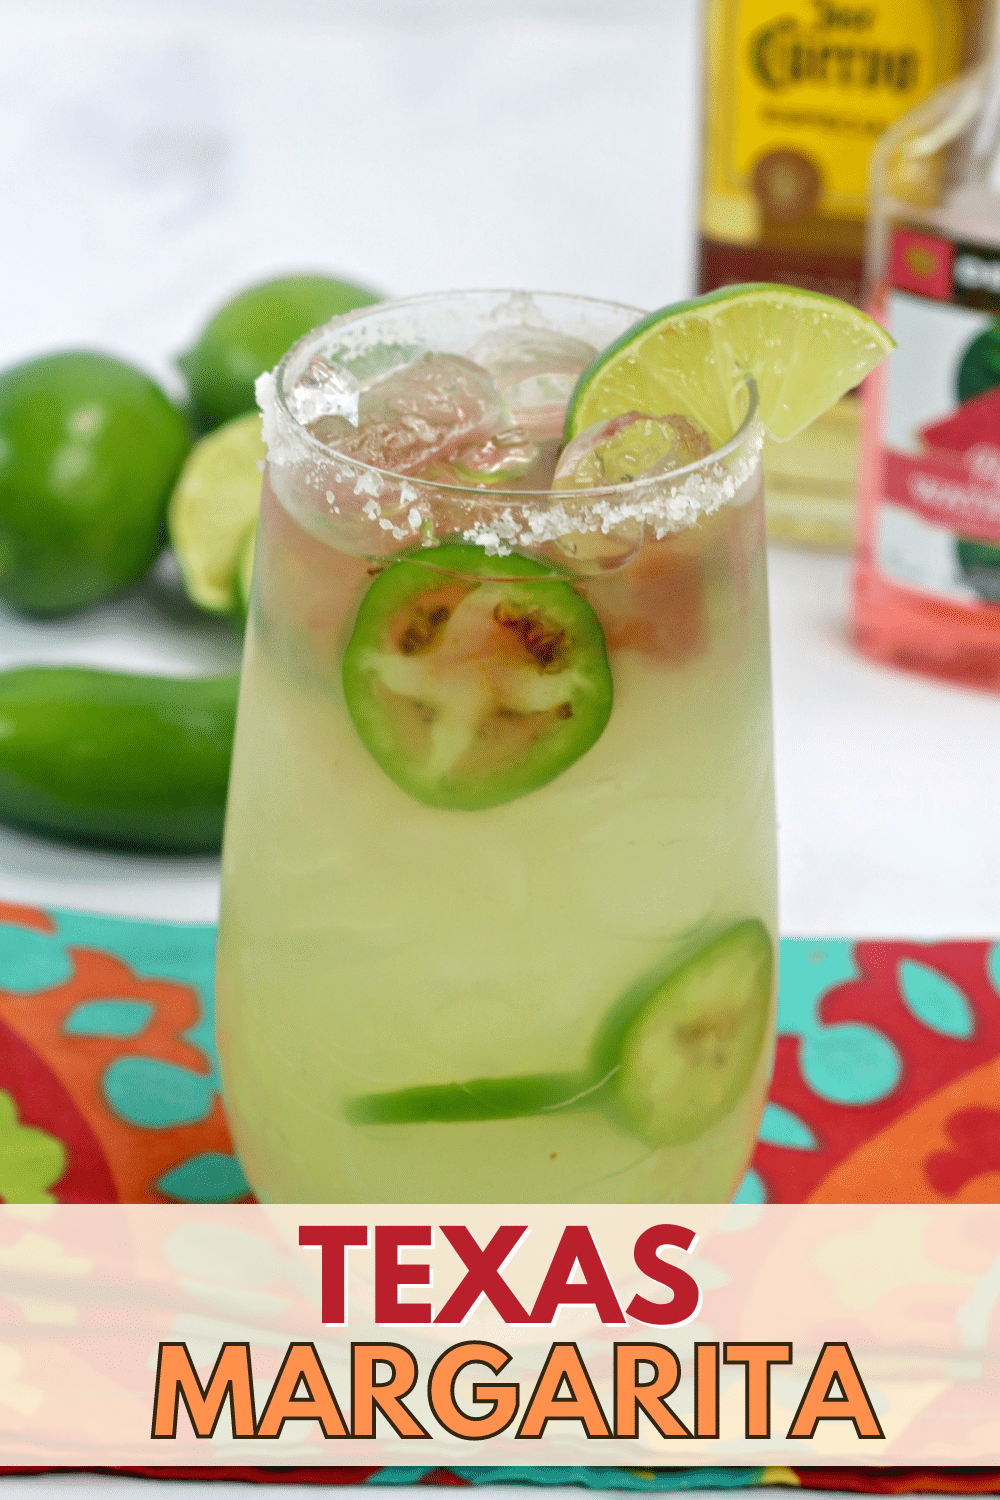 This Texas Margarita is so refreshing and delicious making it perfect for Cinco De Mayo. Serve his tangy and spicy drink at your next party! #texasmargarita #texasmargaritarecipe #cocktaillover #margarita #traditionalmargarita via @wondermomwannab